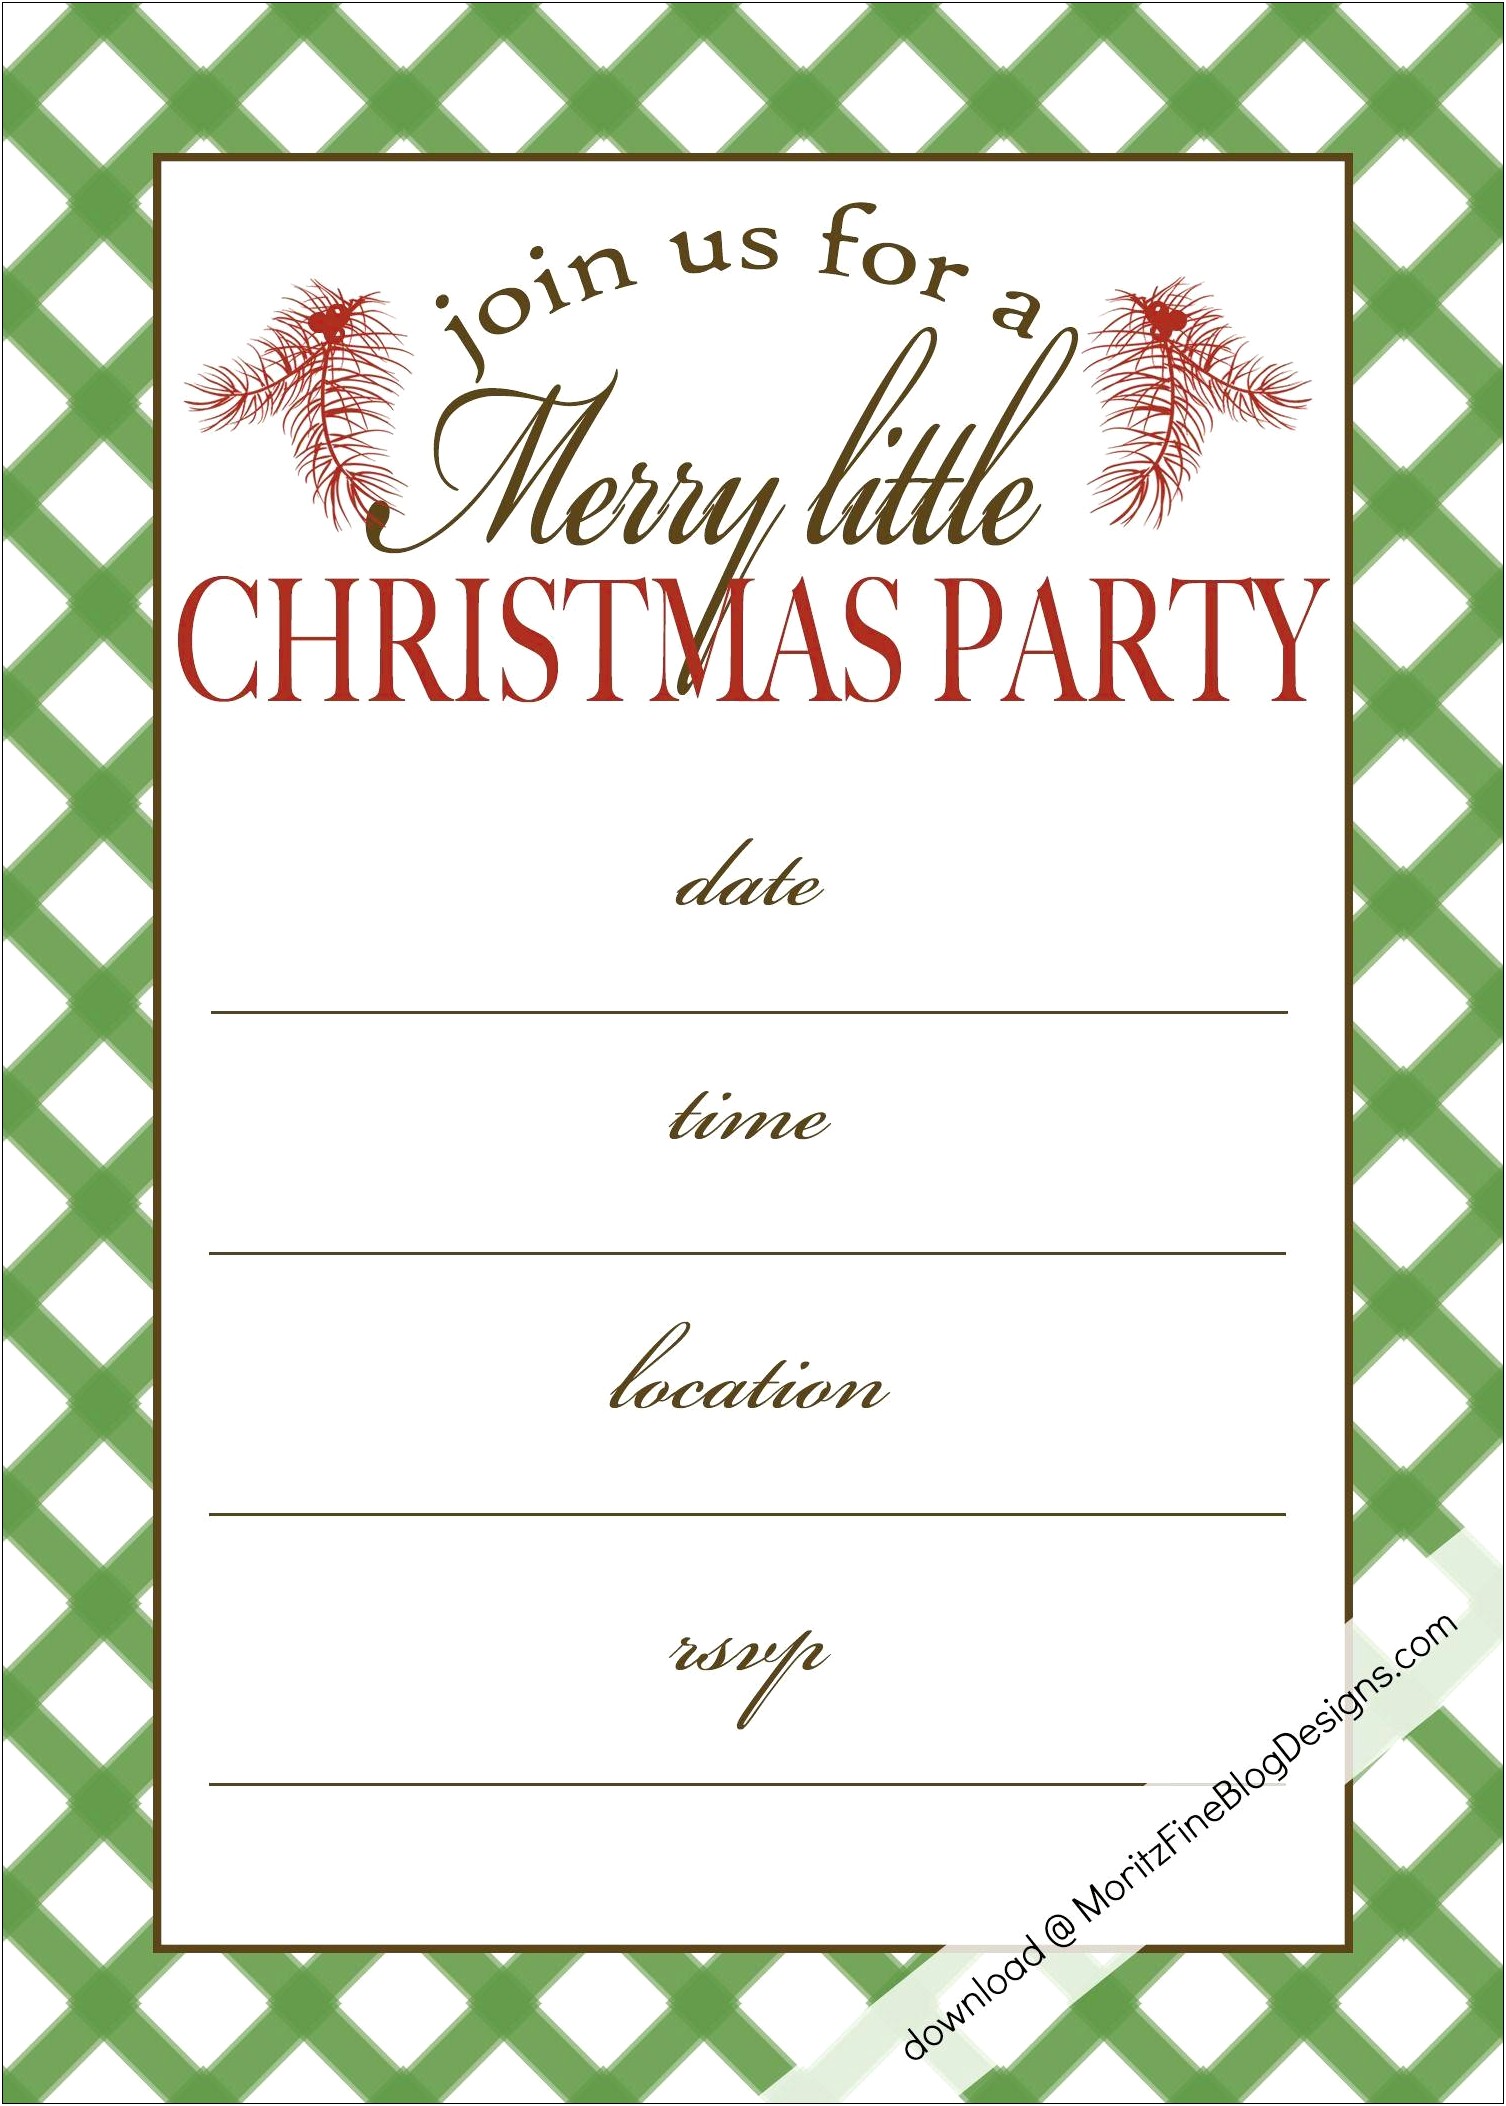 Microsoft Word Holiday Party Invitation Template